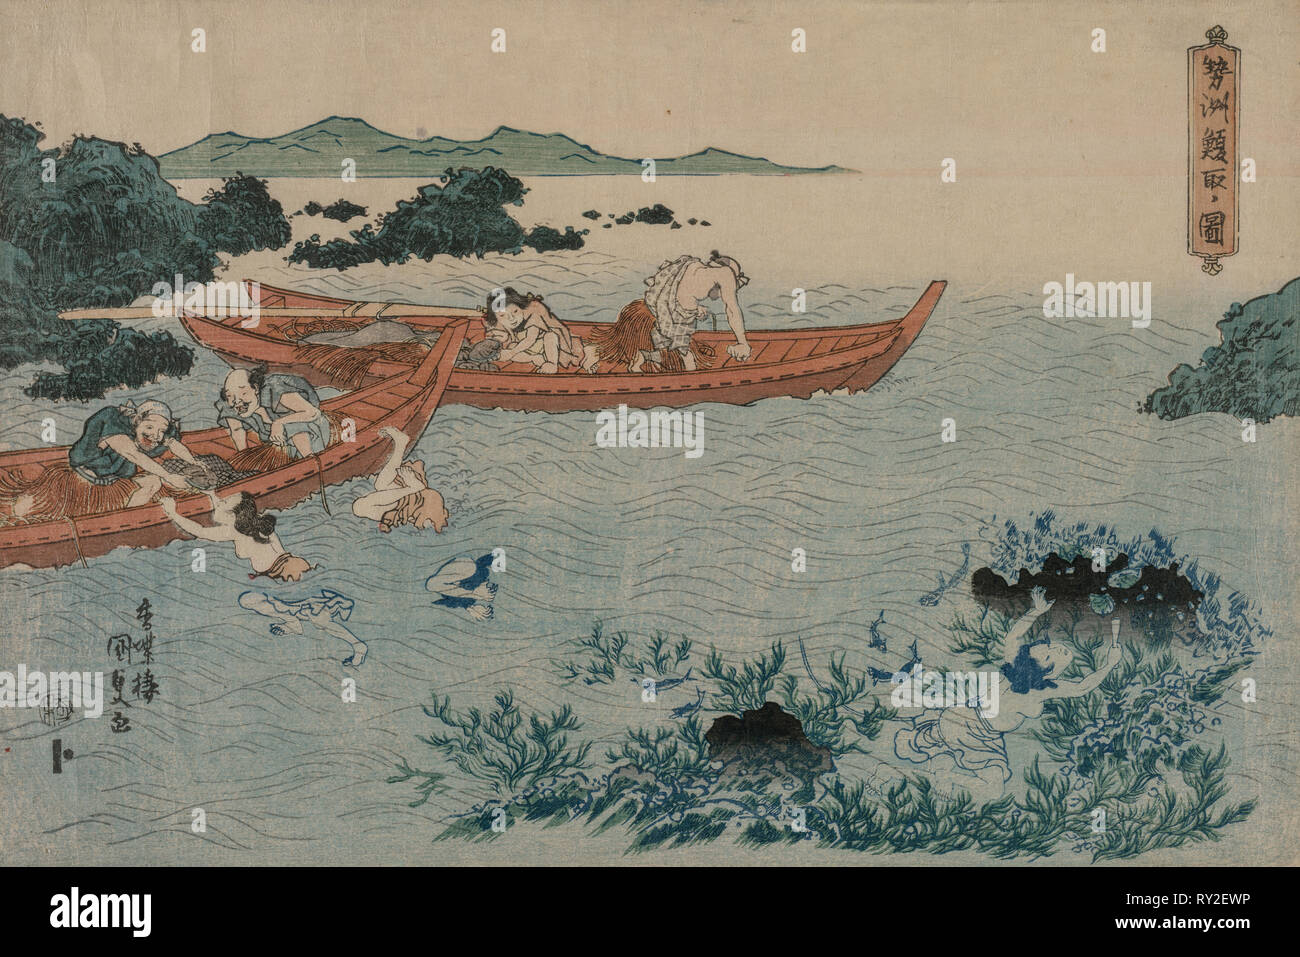 Abalone Divers off the Coast of Ise, from an Untitled Landscape Series, early 1830s. Utagawa Kunisada (Japanese, 1786-1865). Color woodblock print; overall: 27.4 x 40 cm (10 13/16 x 15 3/4 in Stock Photo